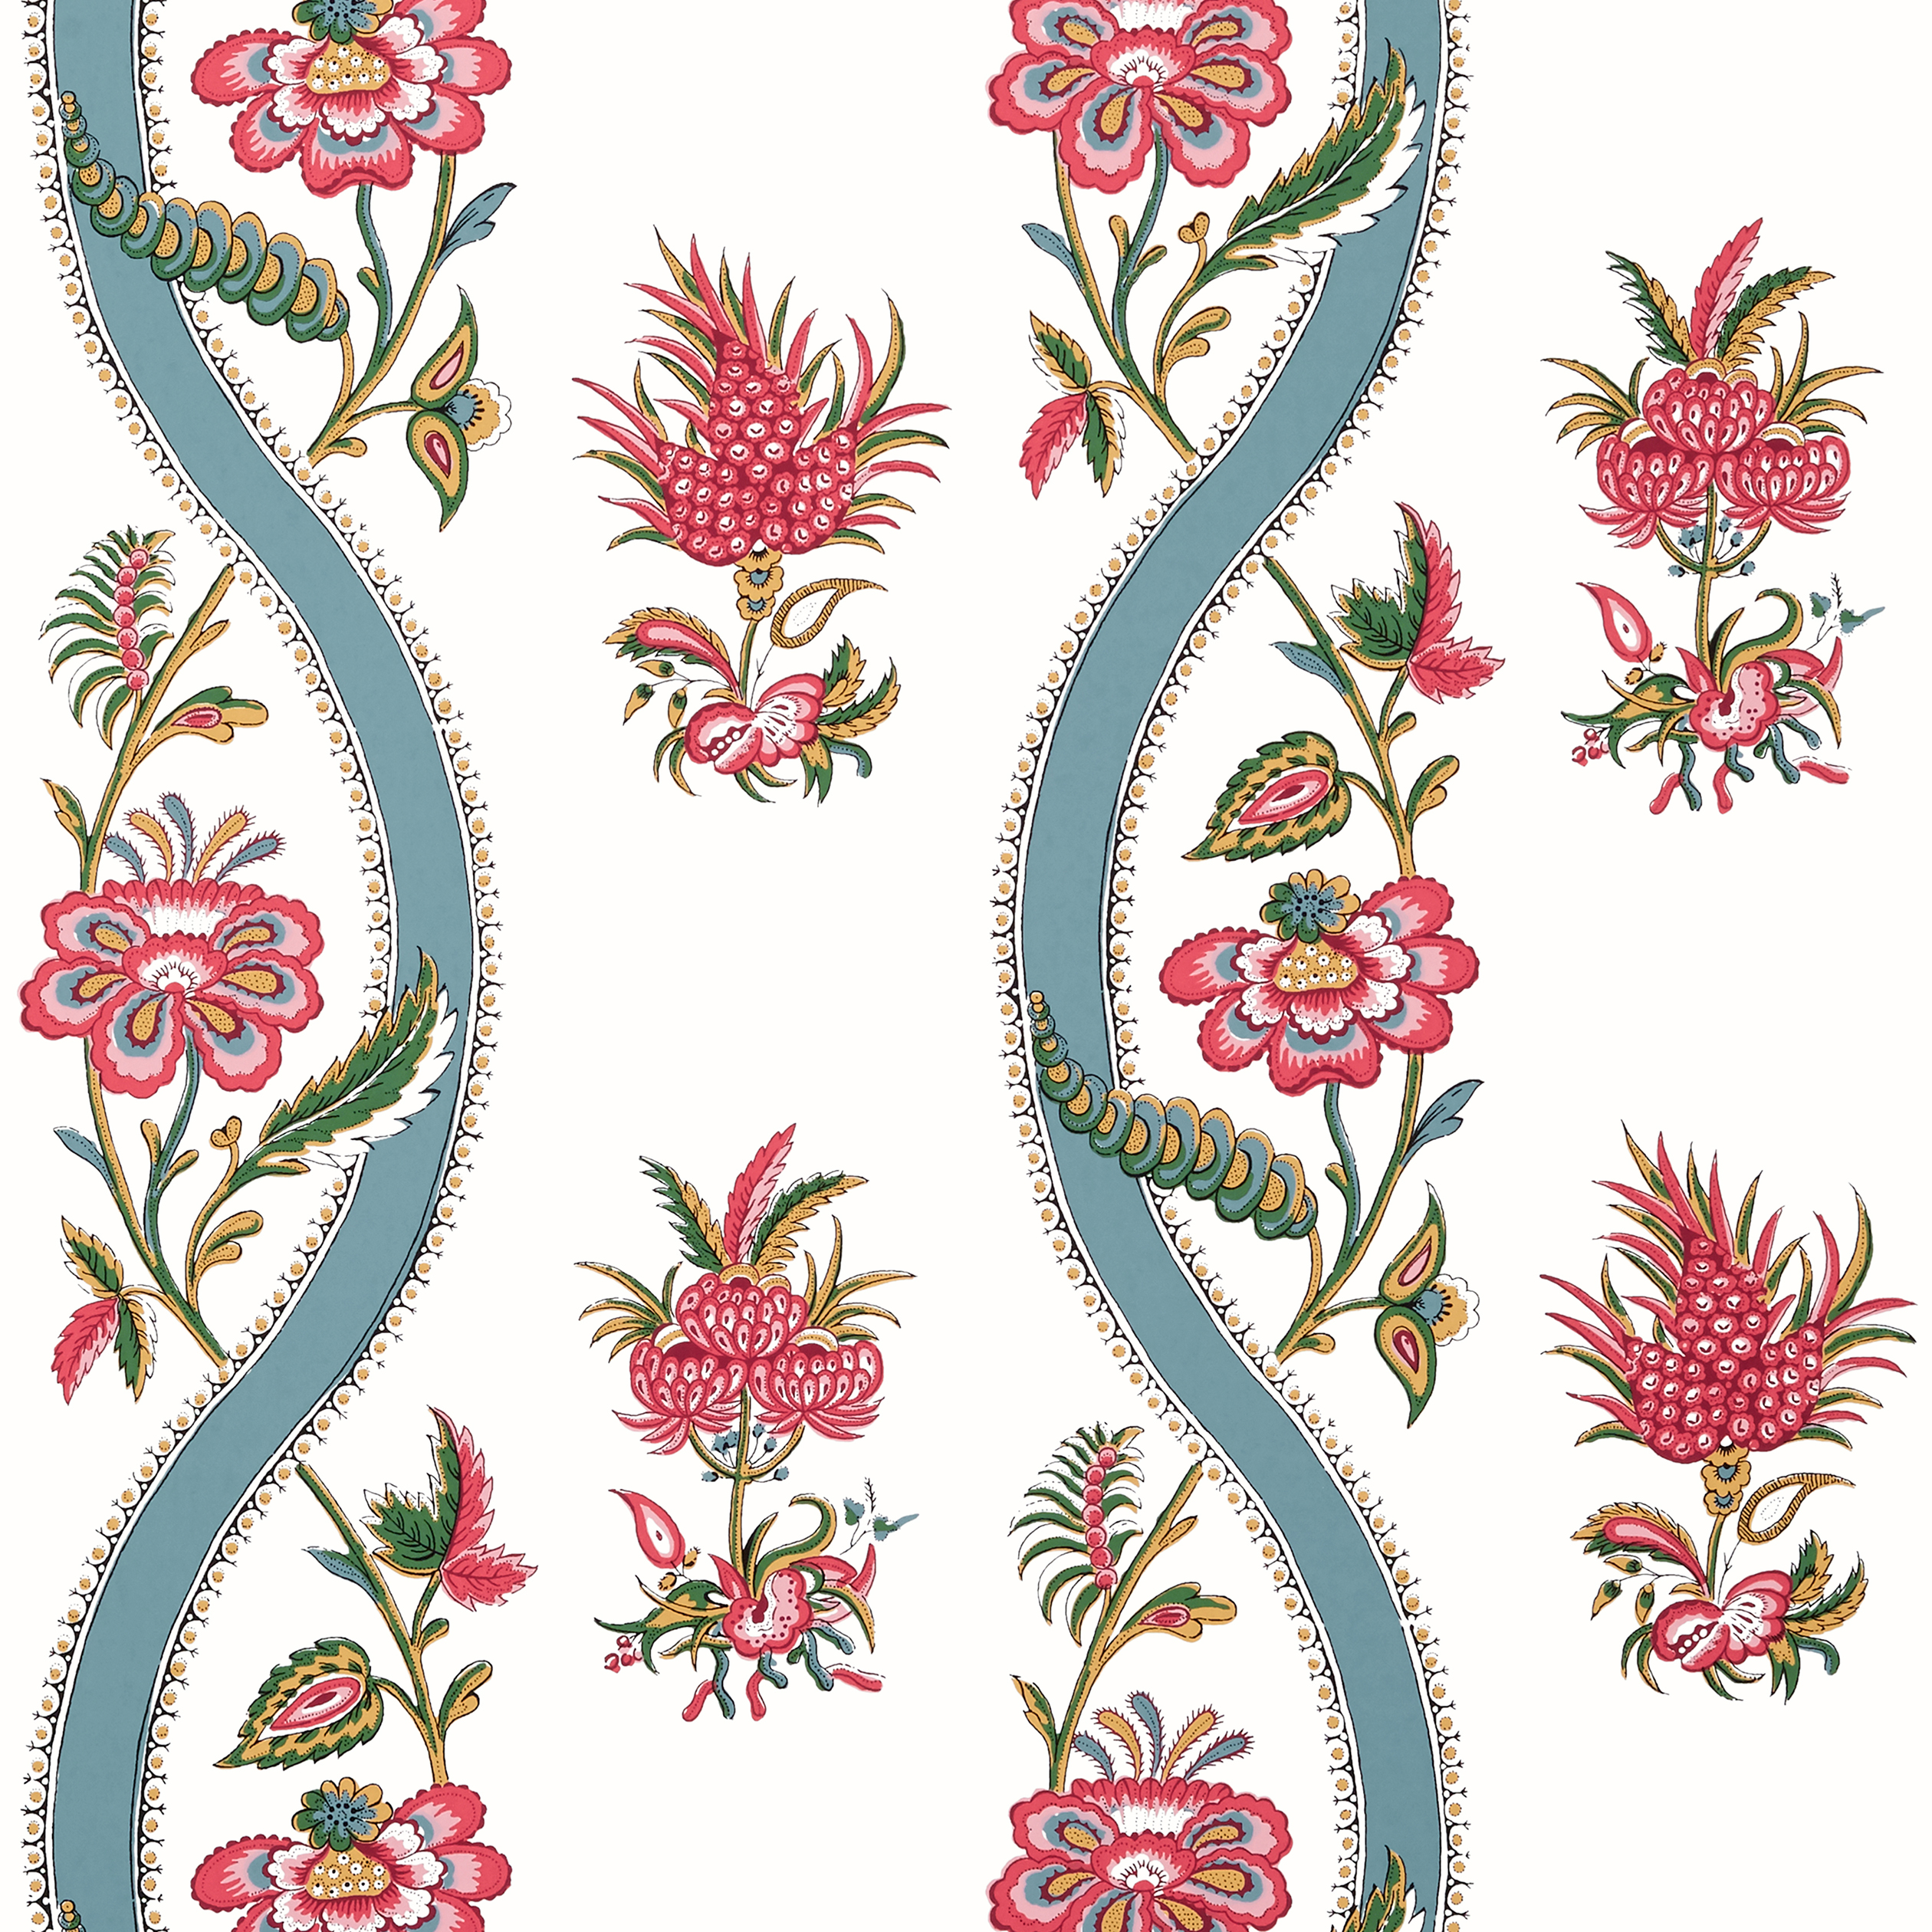 T36426 RIBBON FLORAL Wallpaper Raspberry and Teal from the Thibaut Indienne  collection